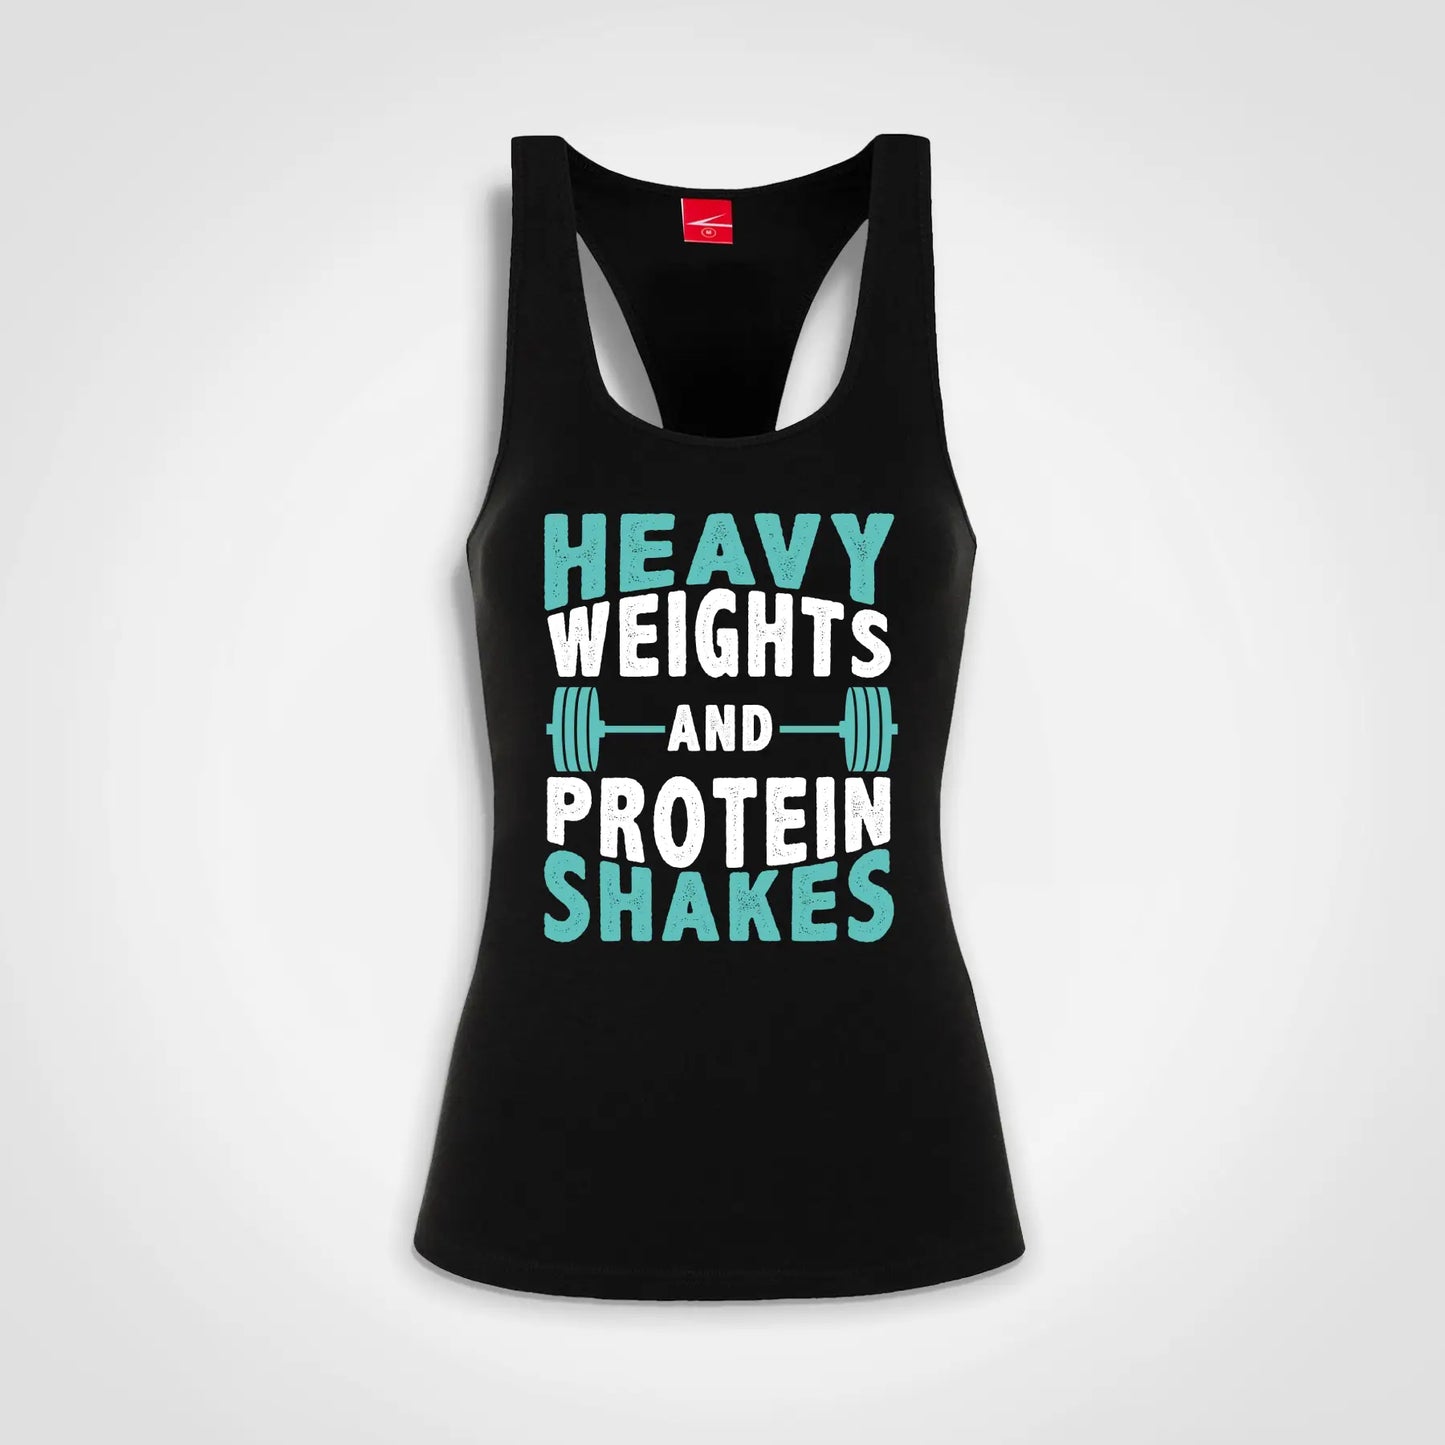 Heavy Weights and Protein Shakes Ladies Tank Black IZZIT APPAREL